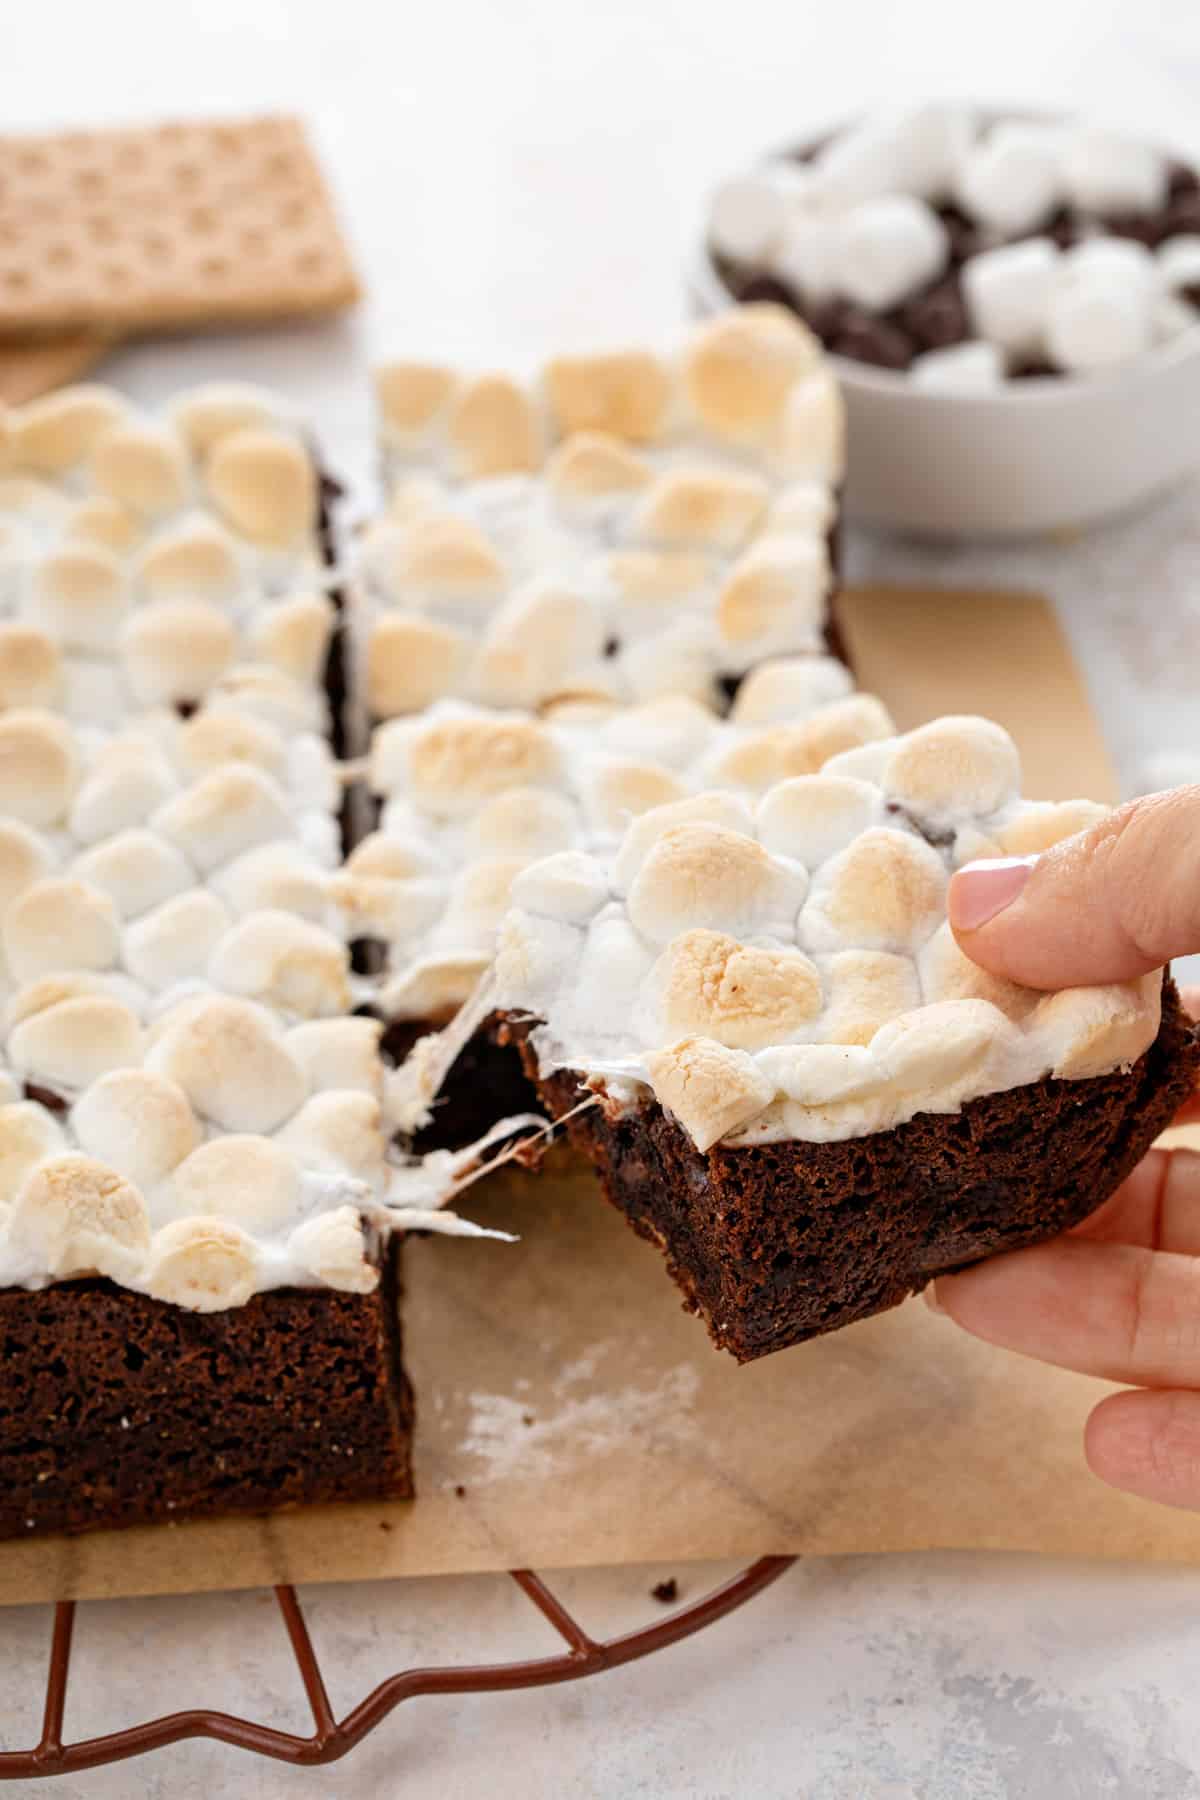 Hand picking an easy s'mores brownie from other sliced brownies.